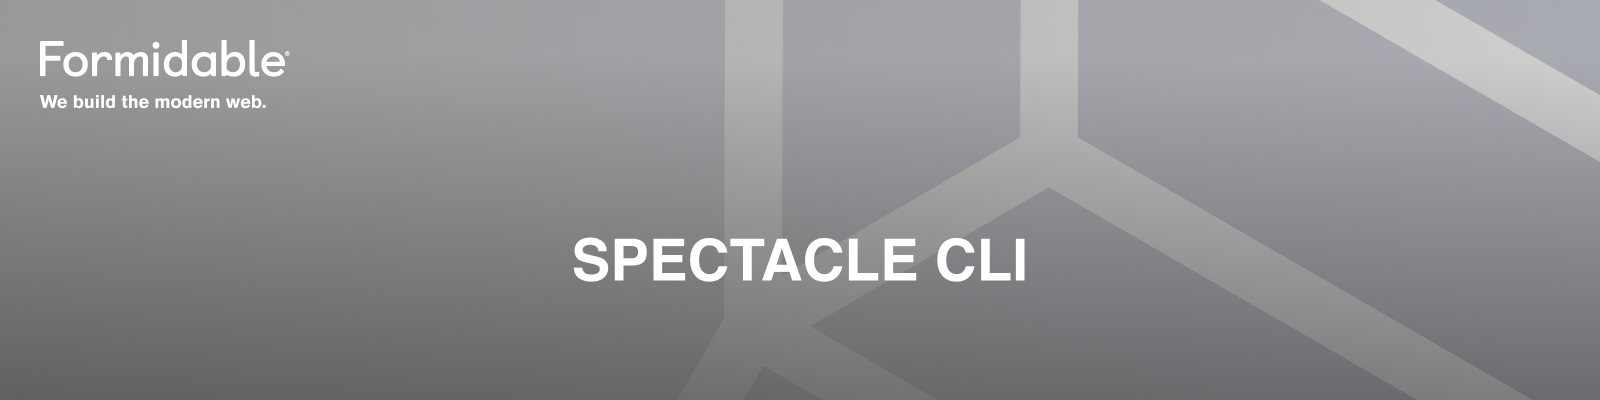 Spectacle CLI — Formidable, We build the modern web